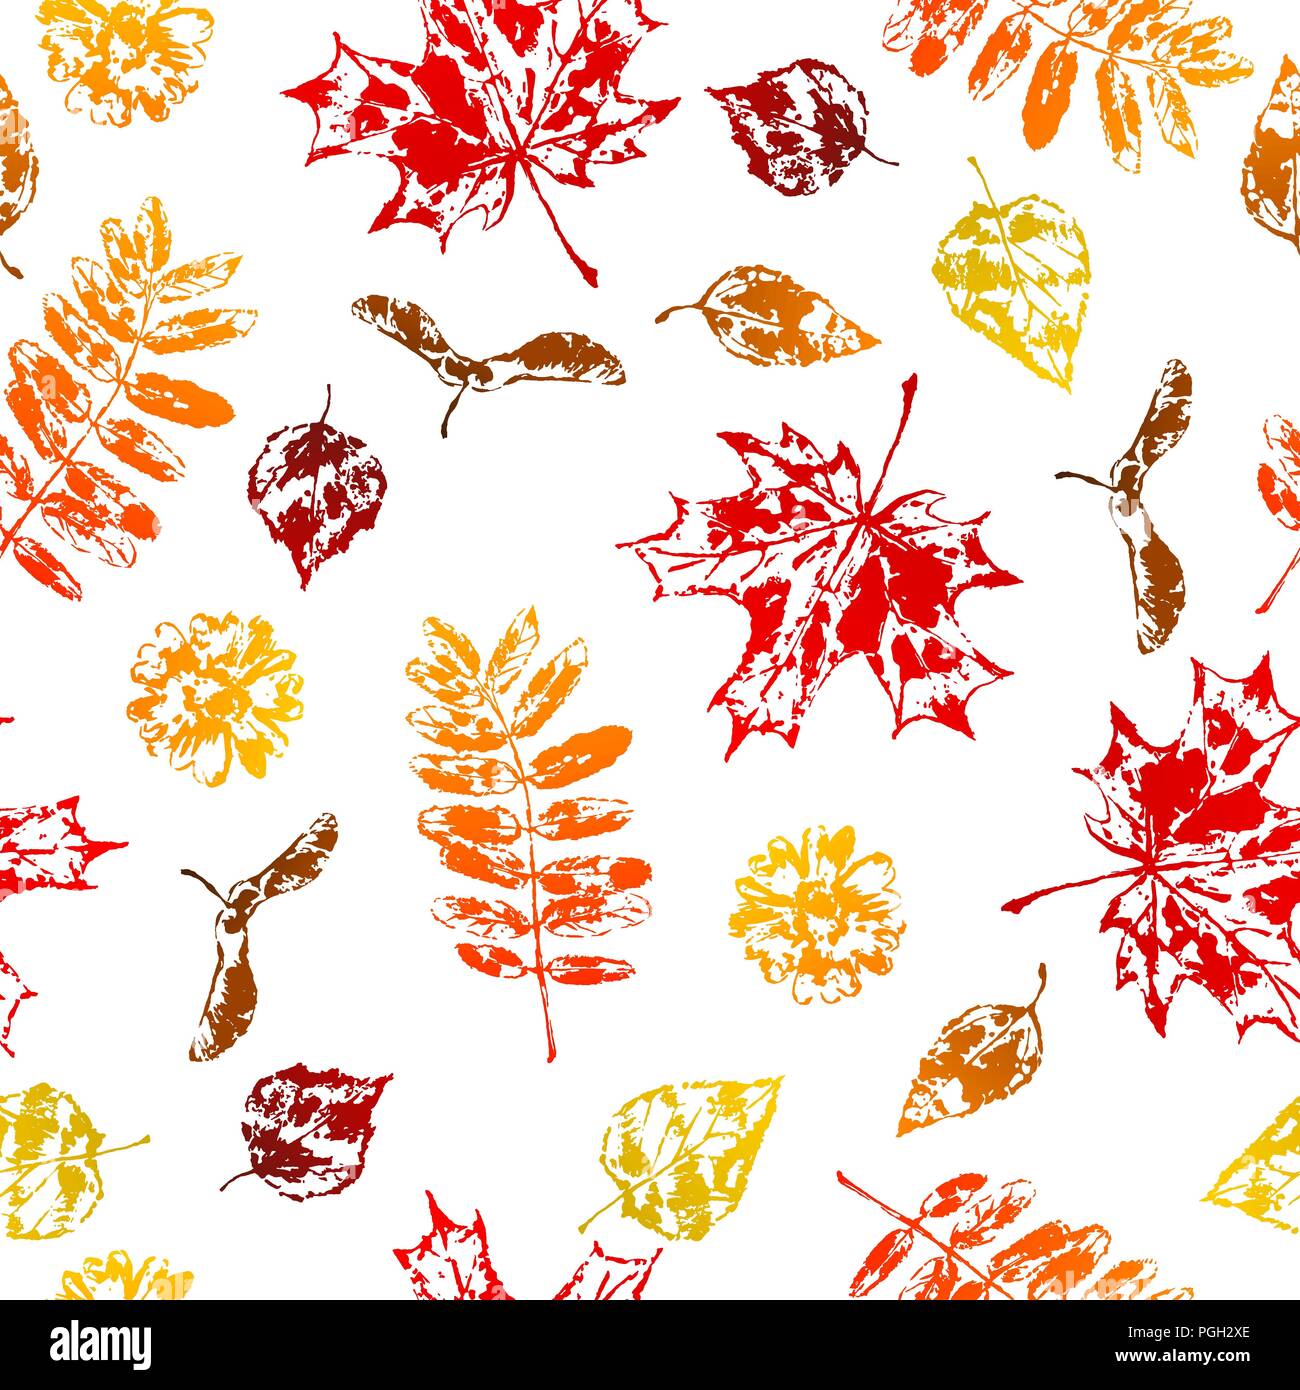 Seamless pattern with printed leaves. Stock Vector